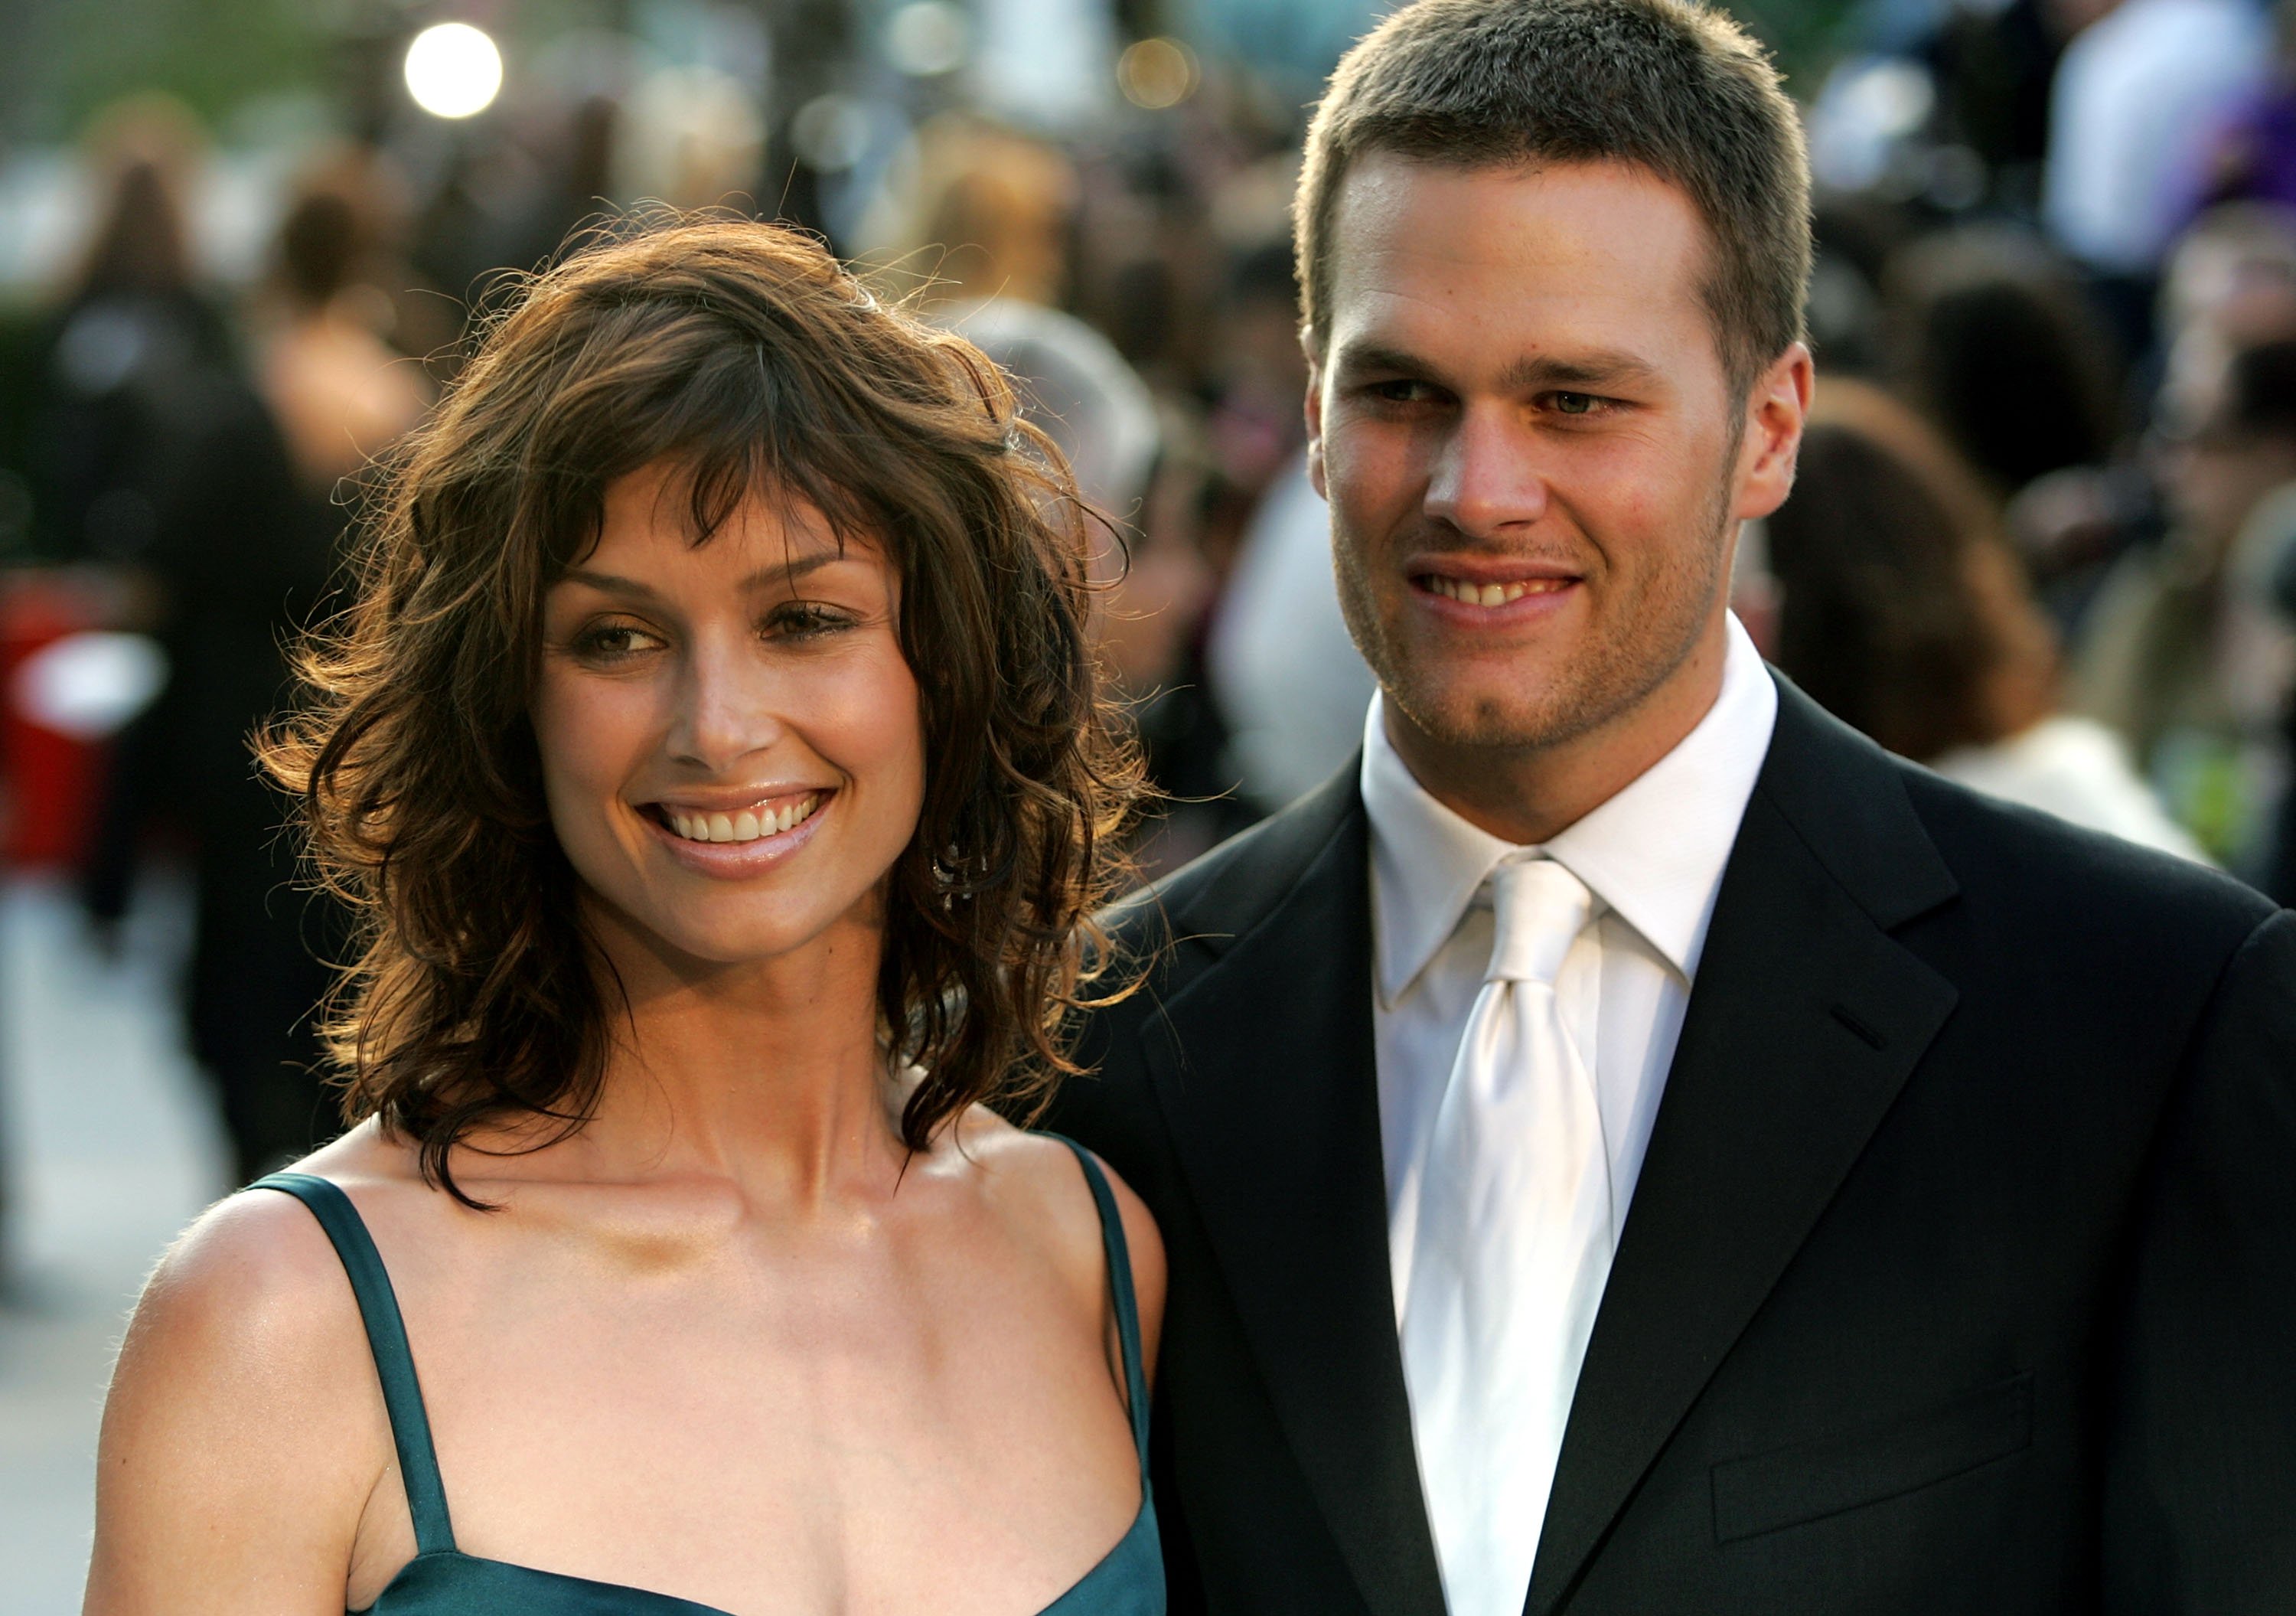 Bridget Moynahan and quarterback Tom Brady and arrive at the Vanity Fair Oscar party at Mortons on February 27, 2005 in West Hollywood, California. | Source: Getty Images